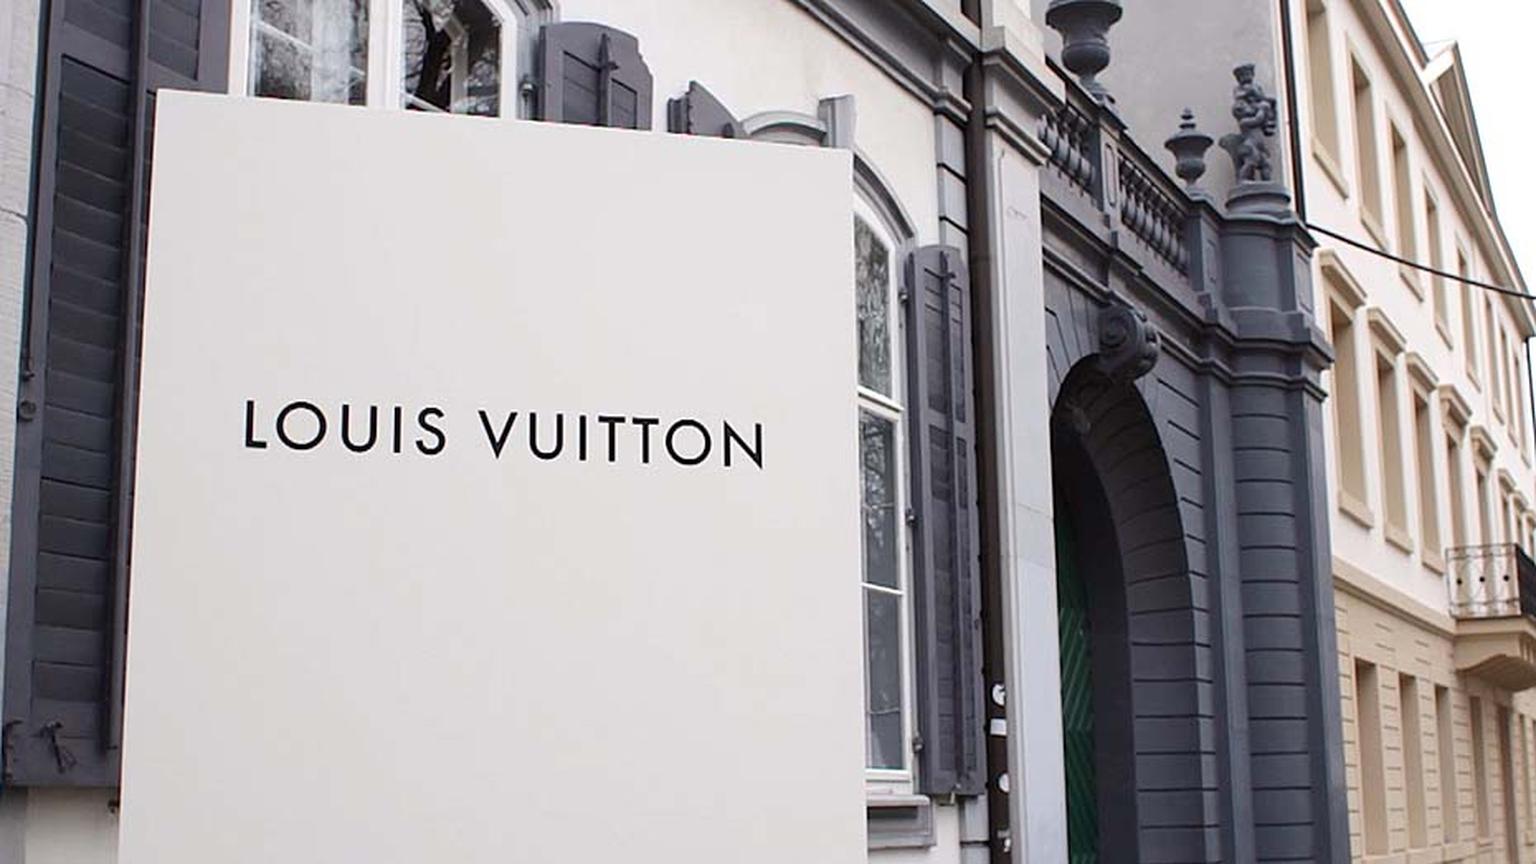 The Jewellery Editor paid a visit to the Louis Vuitton villa in Basel to preview the new Louis Vuitton women's watch collection for 2015.